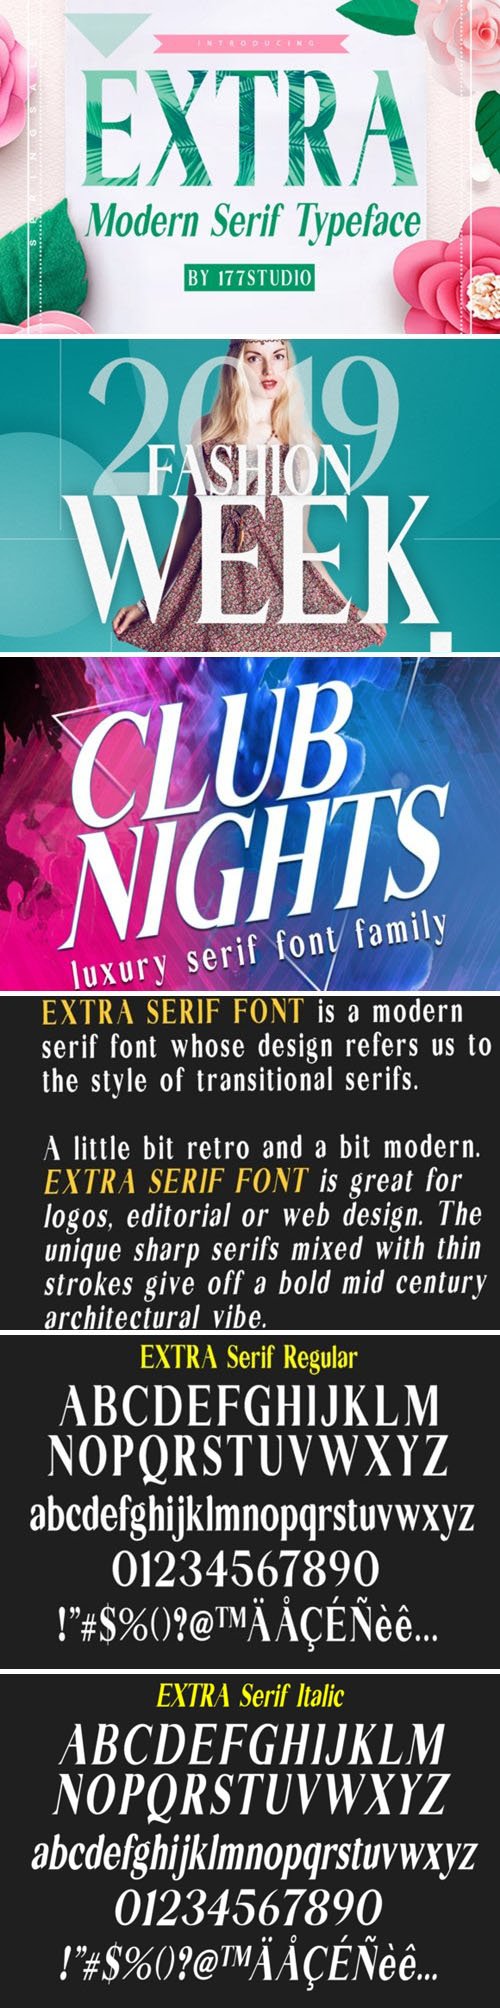 Extra - Luxury Serif Font Family [2-Weights]